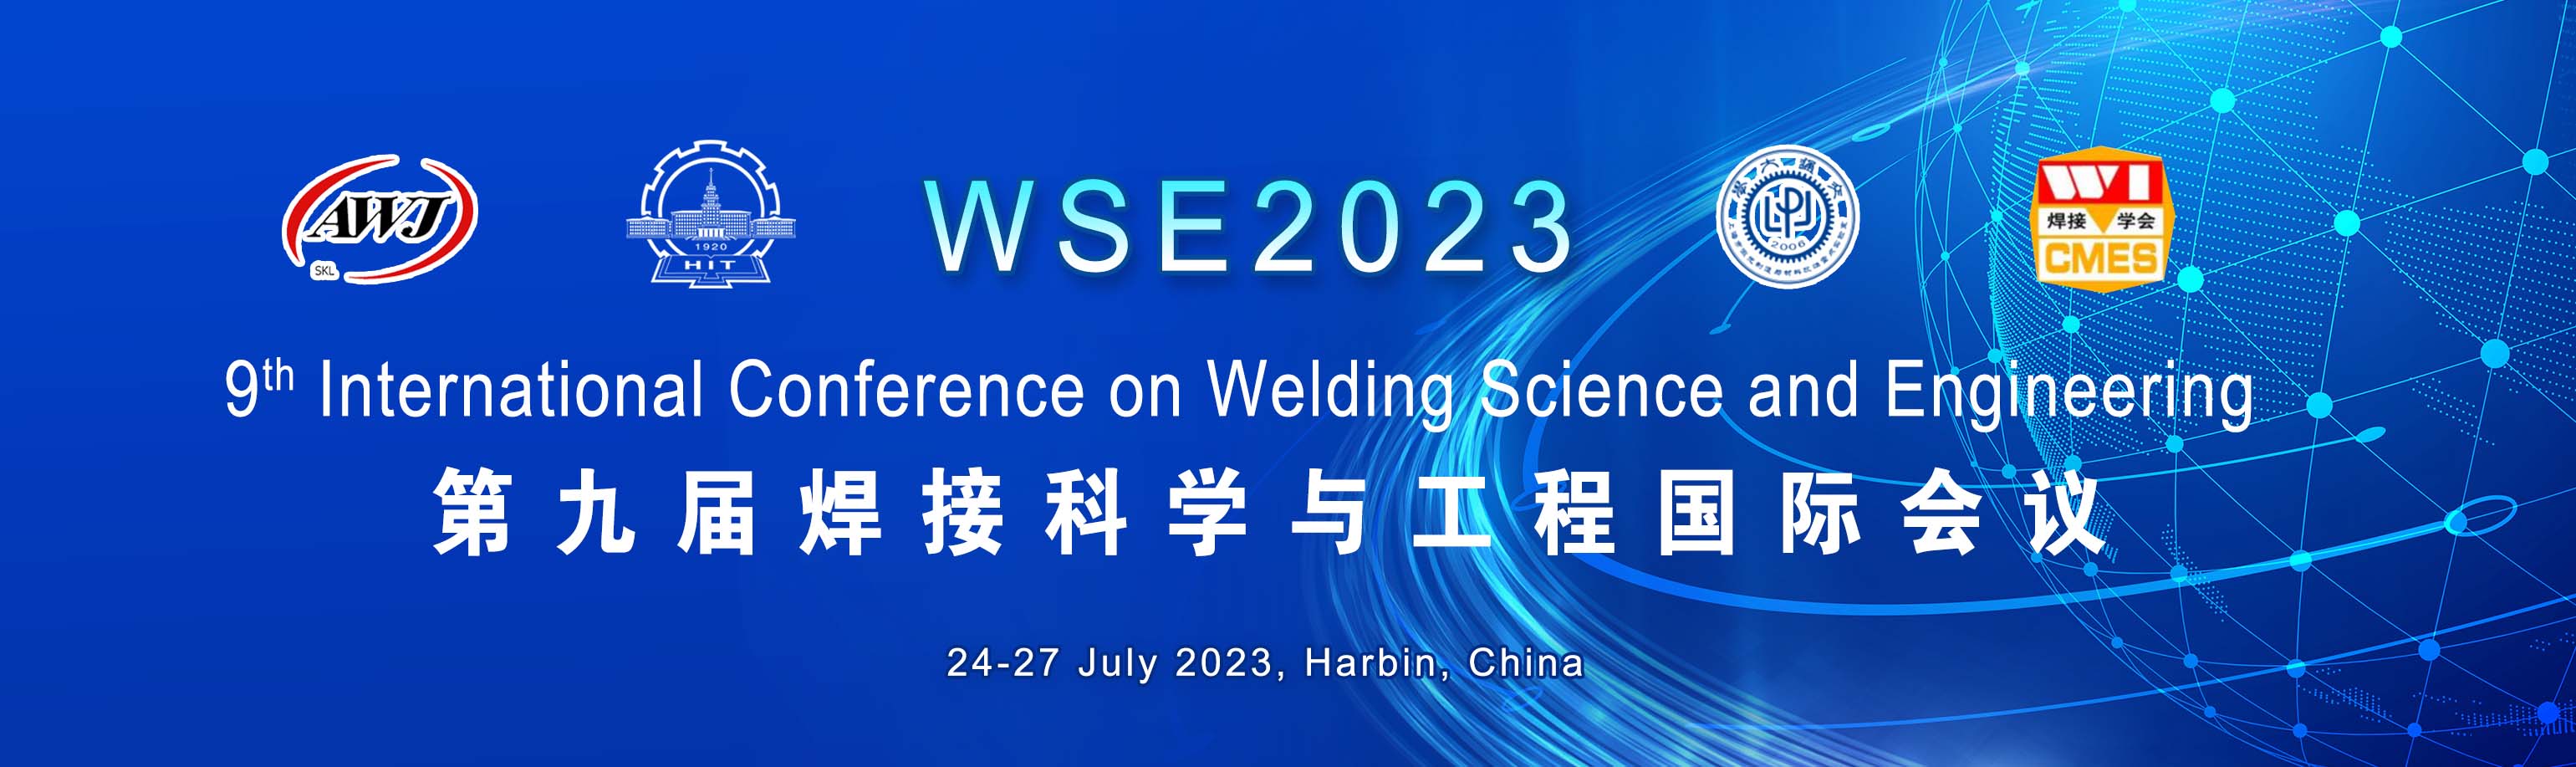 9th International Conference on Welding Science and Engineering（WSE2023）